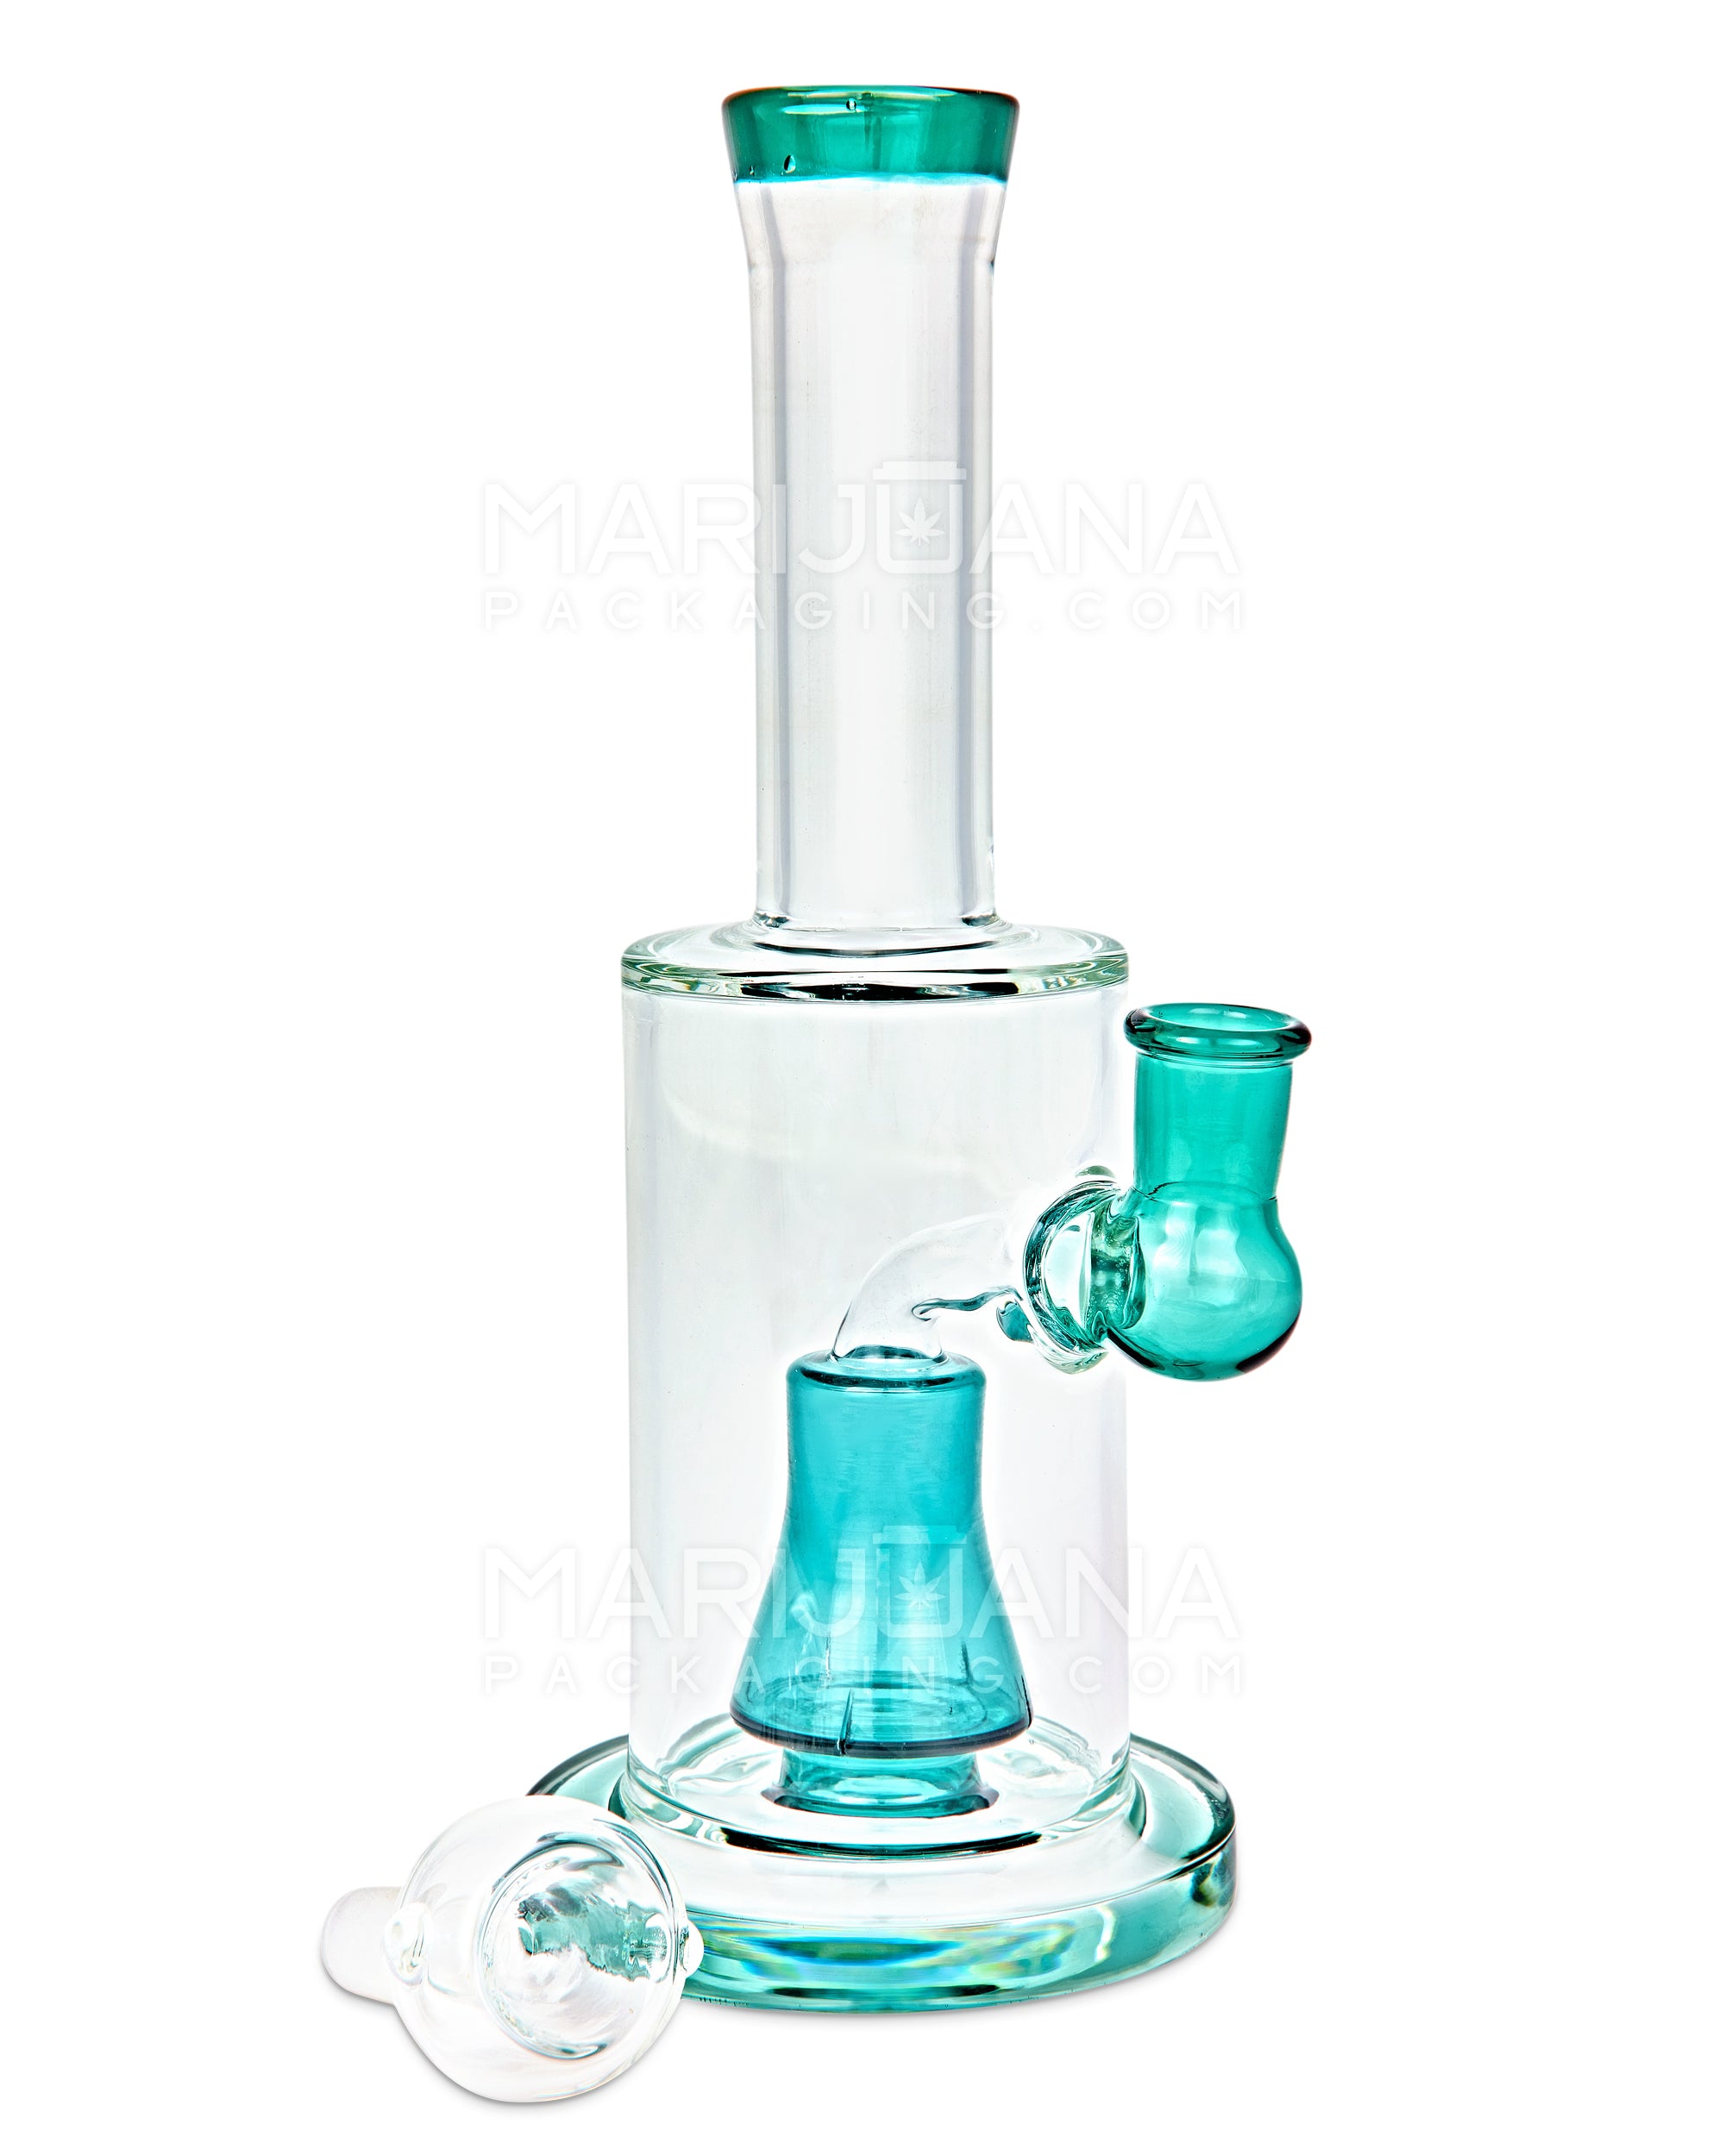 Straight Neck Barrel Perc Glass Water Pipe w/ Thick Base | 8in Tall - 14mm Bowl - Teal - 3